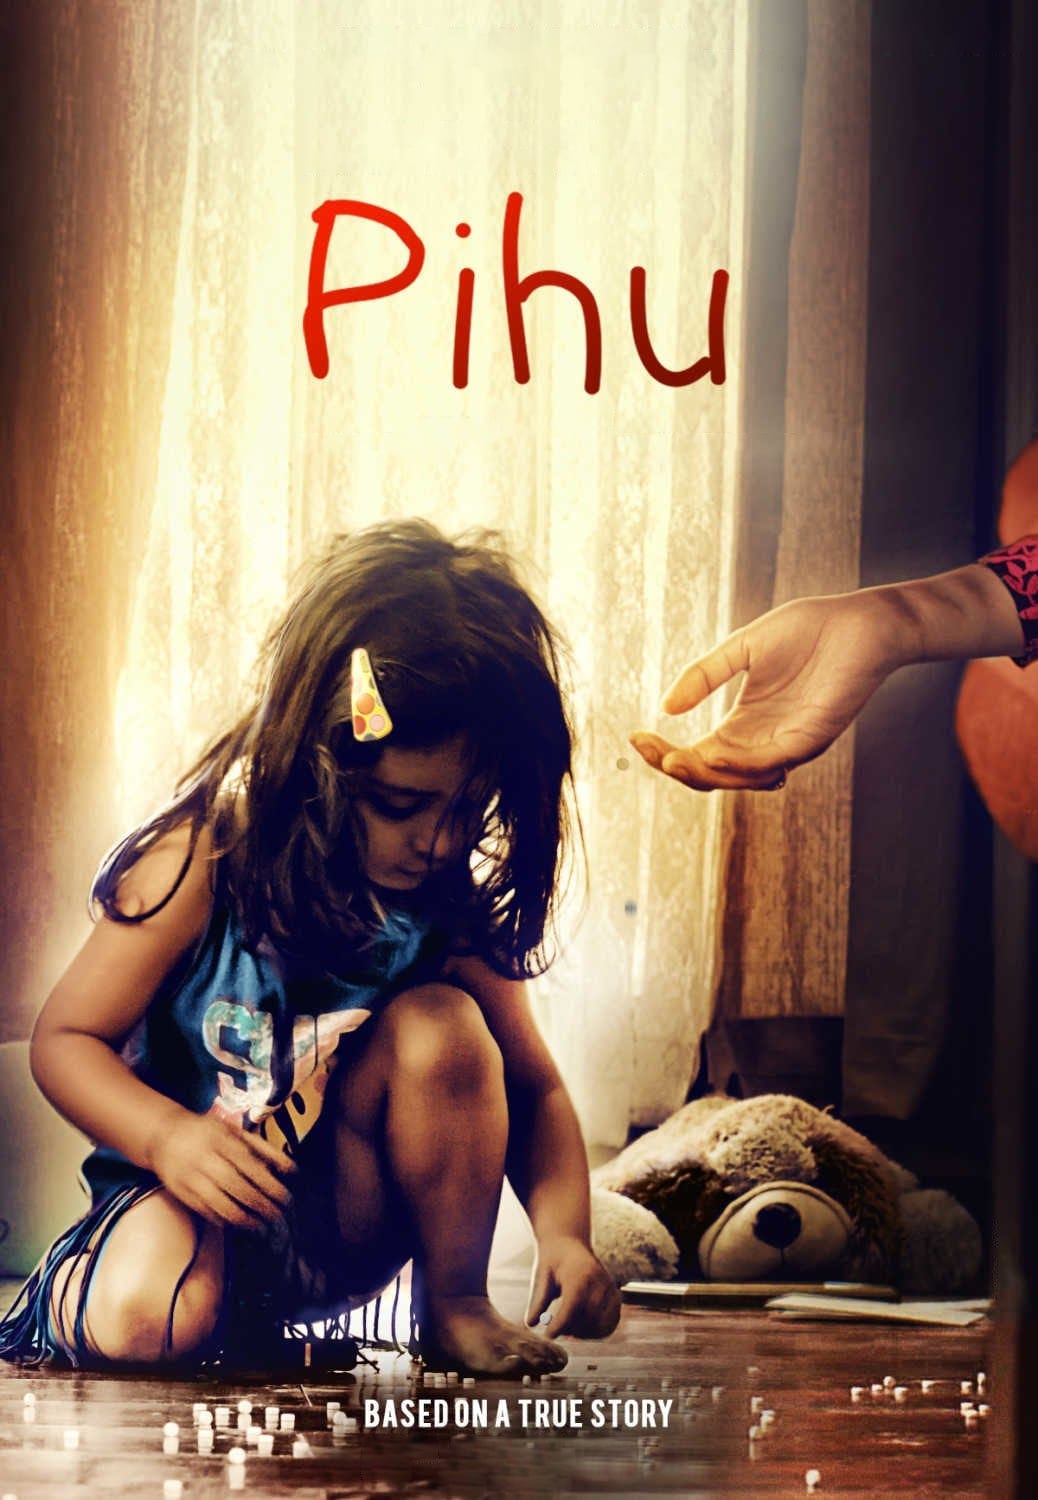 Poster for the movie "Pihu"